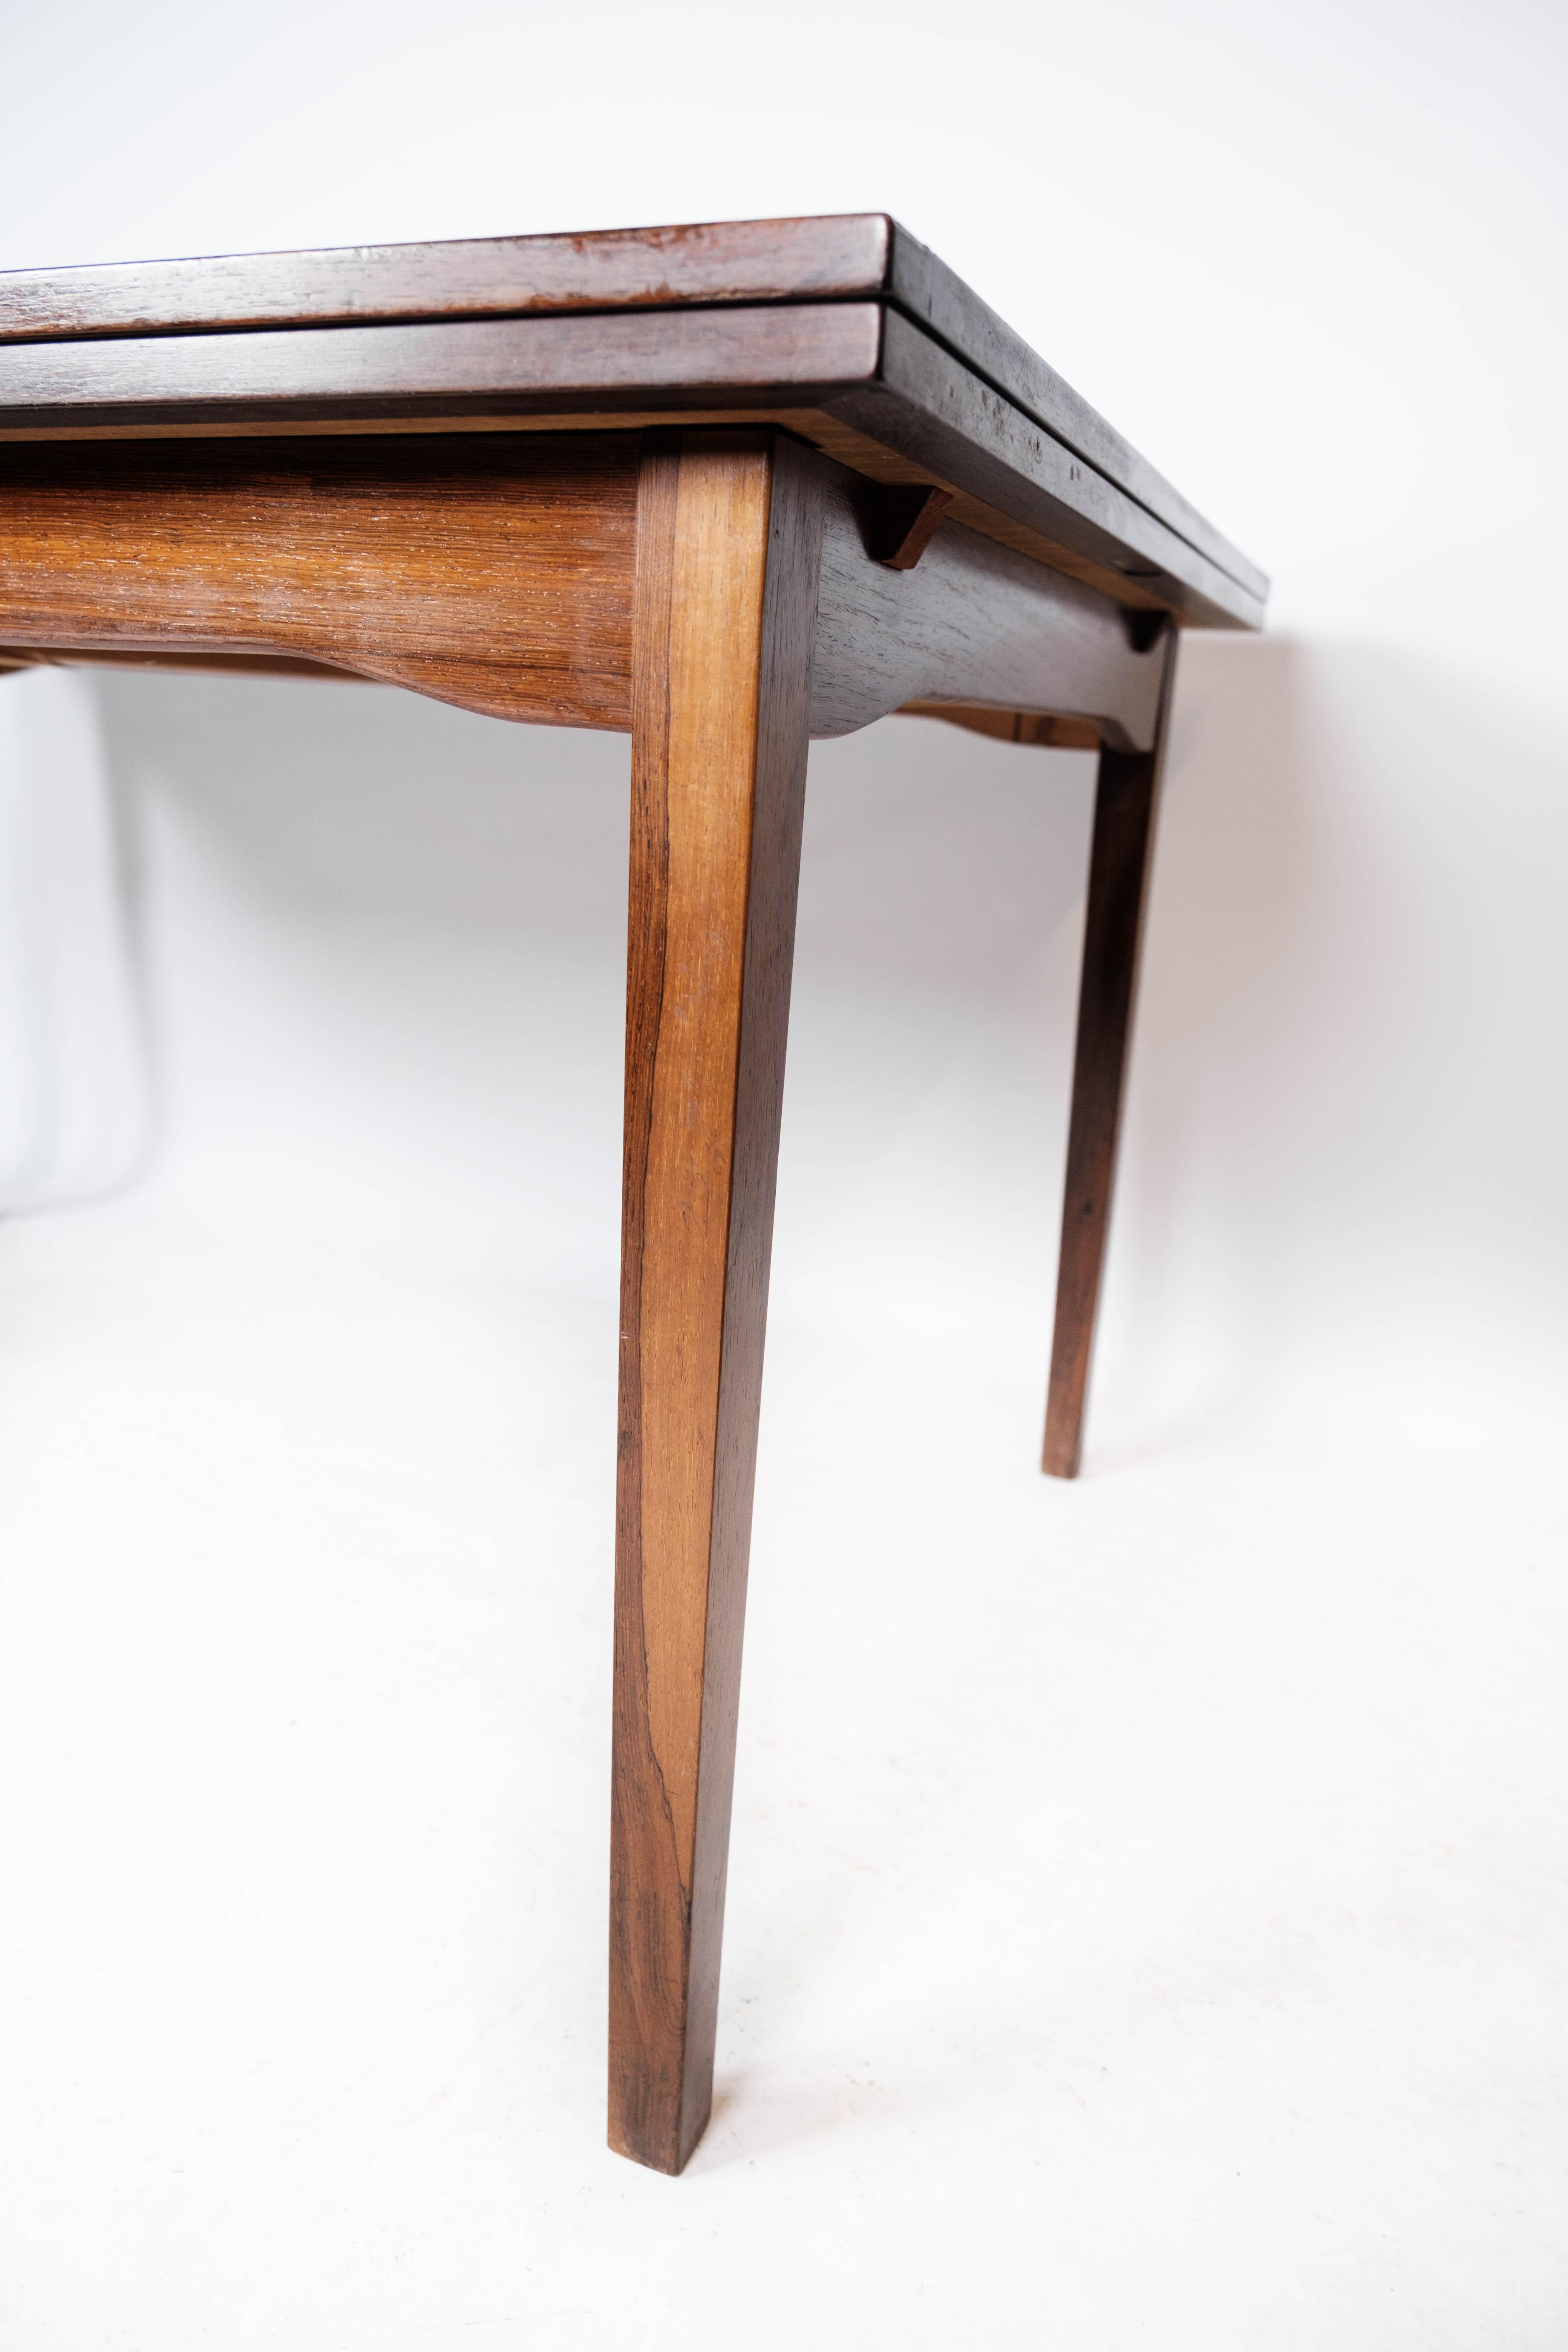 Dining Table in Rosewood with Extension, of Danish Design by Ellegaard, 1960s For Sale 2